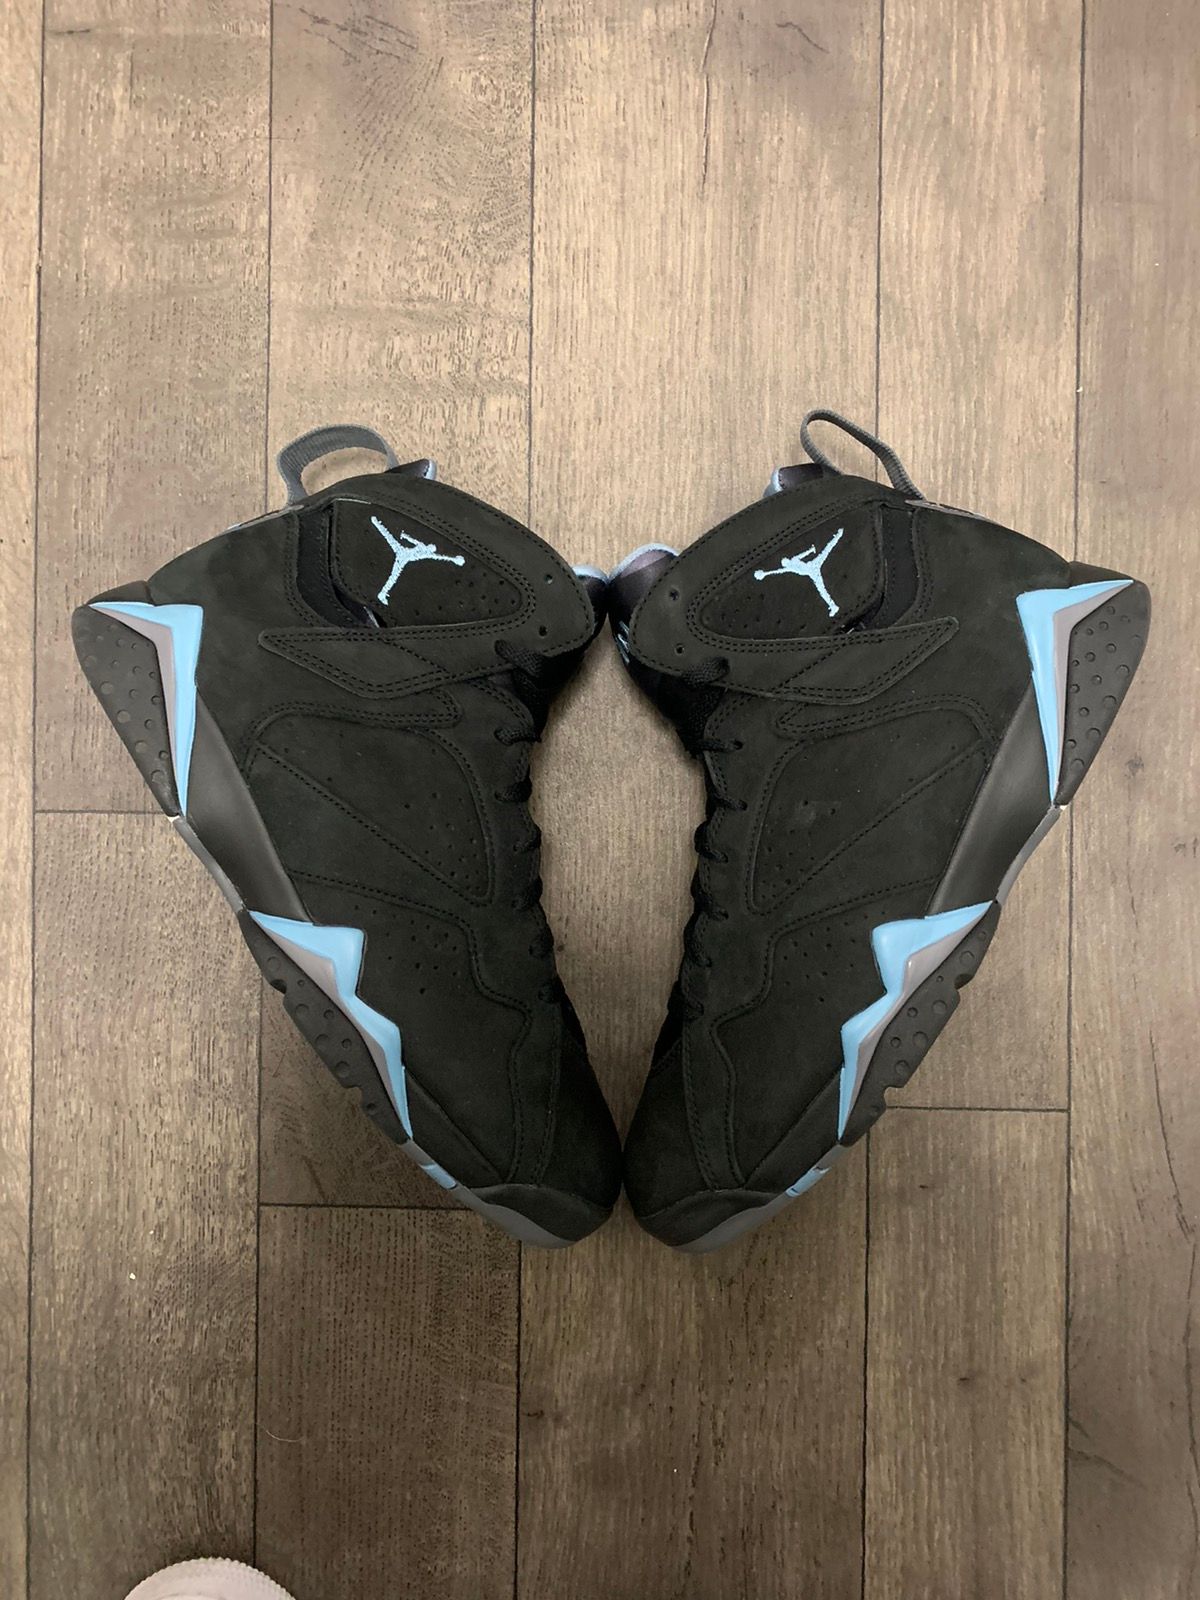 Pre-owned Jordan Brand 7 Chambray Shoes In Black Blue